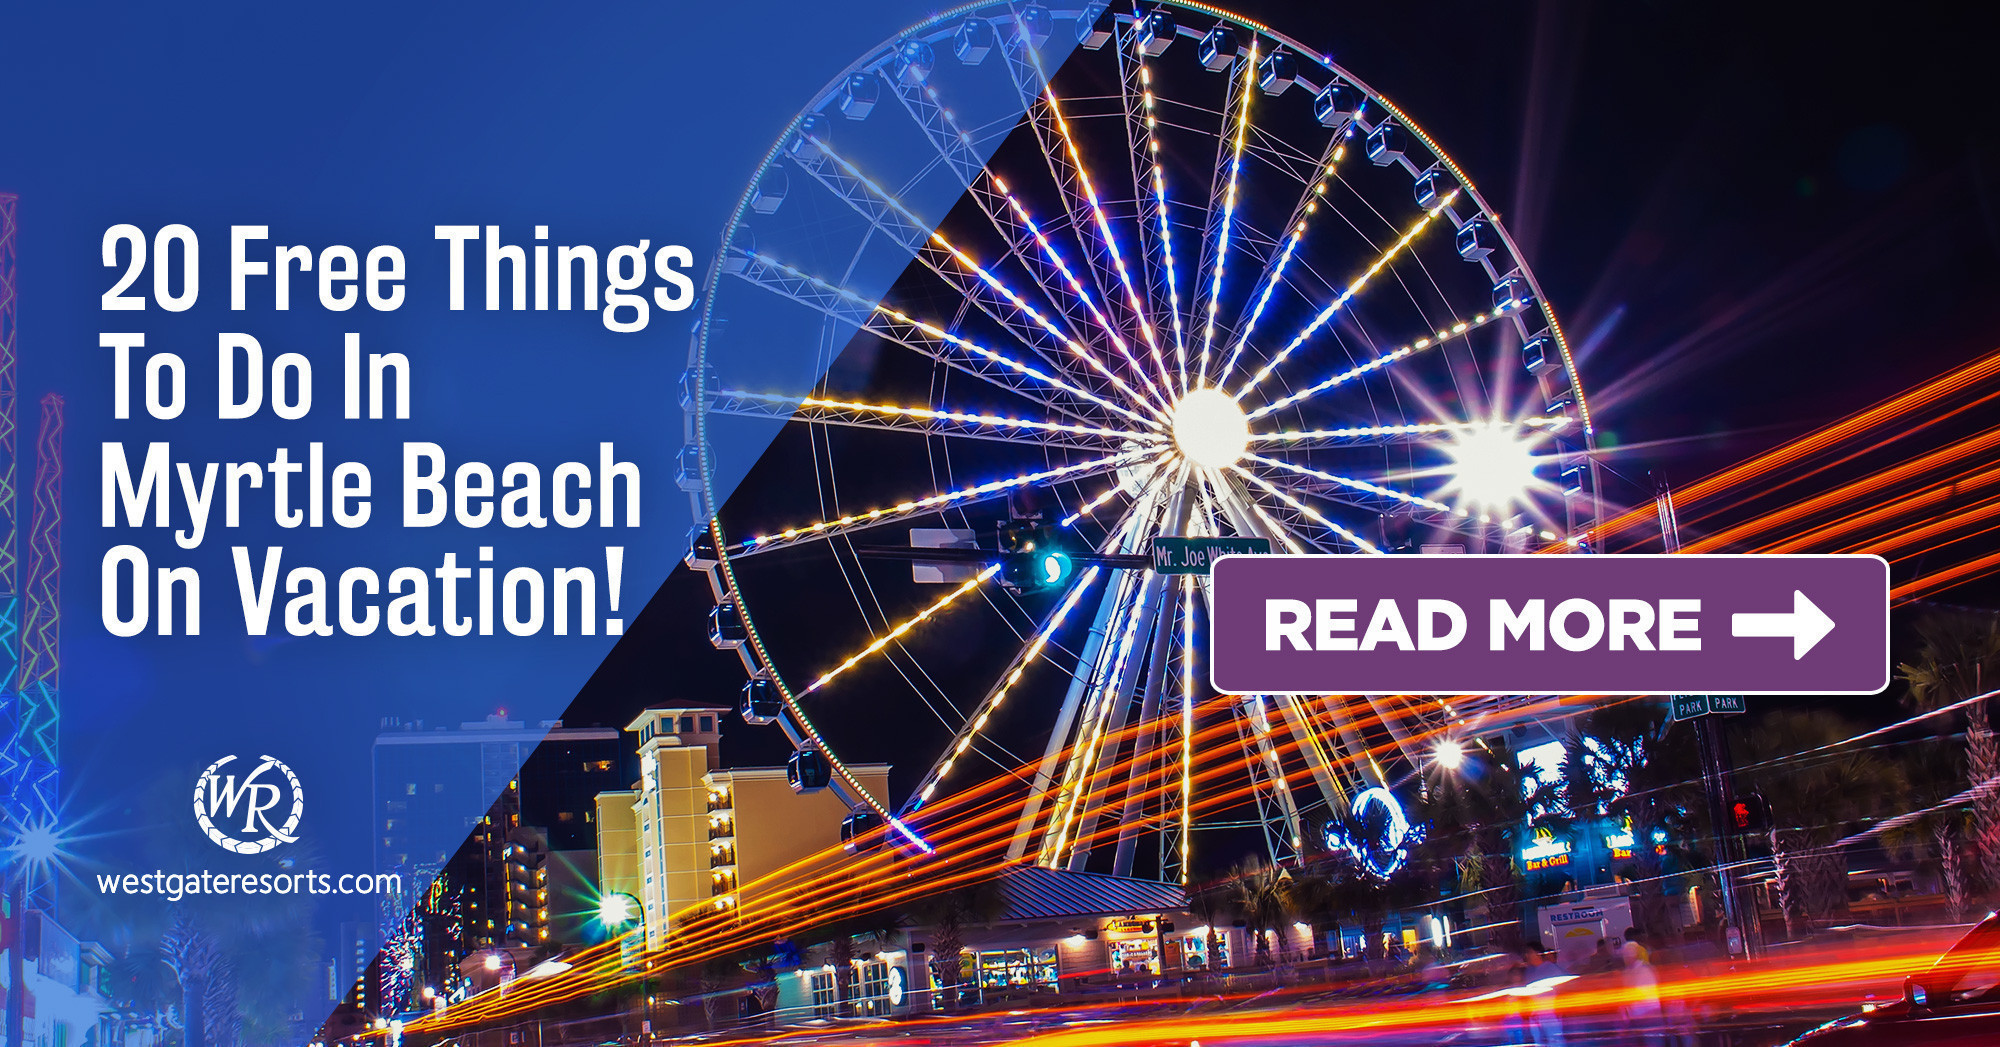 20 Free Things To Do in Myrtle Beach on Vacation!